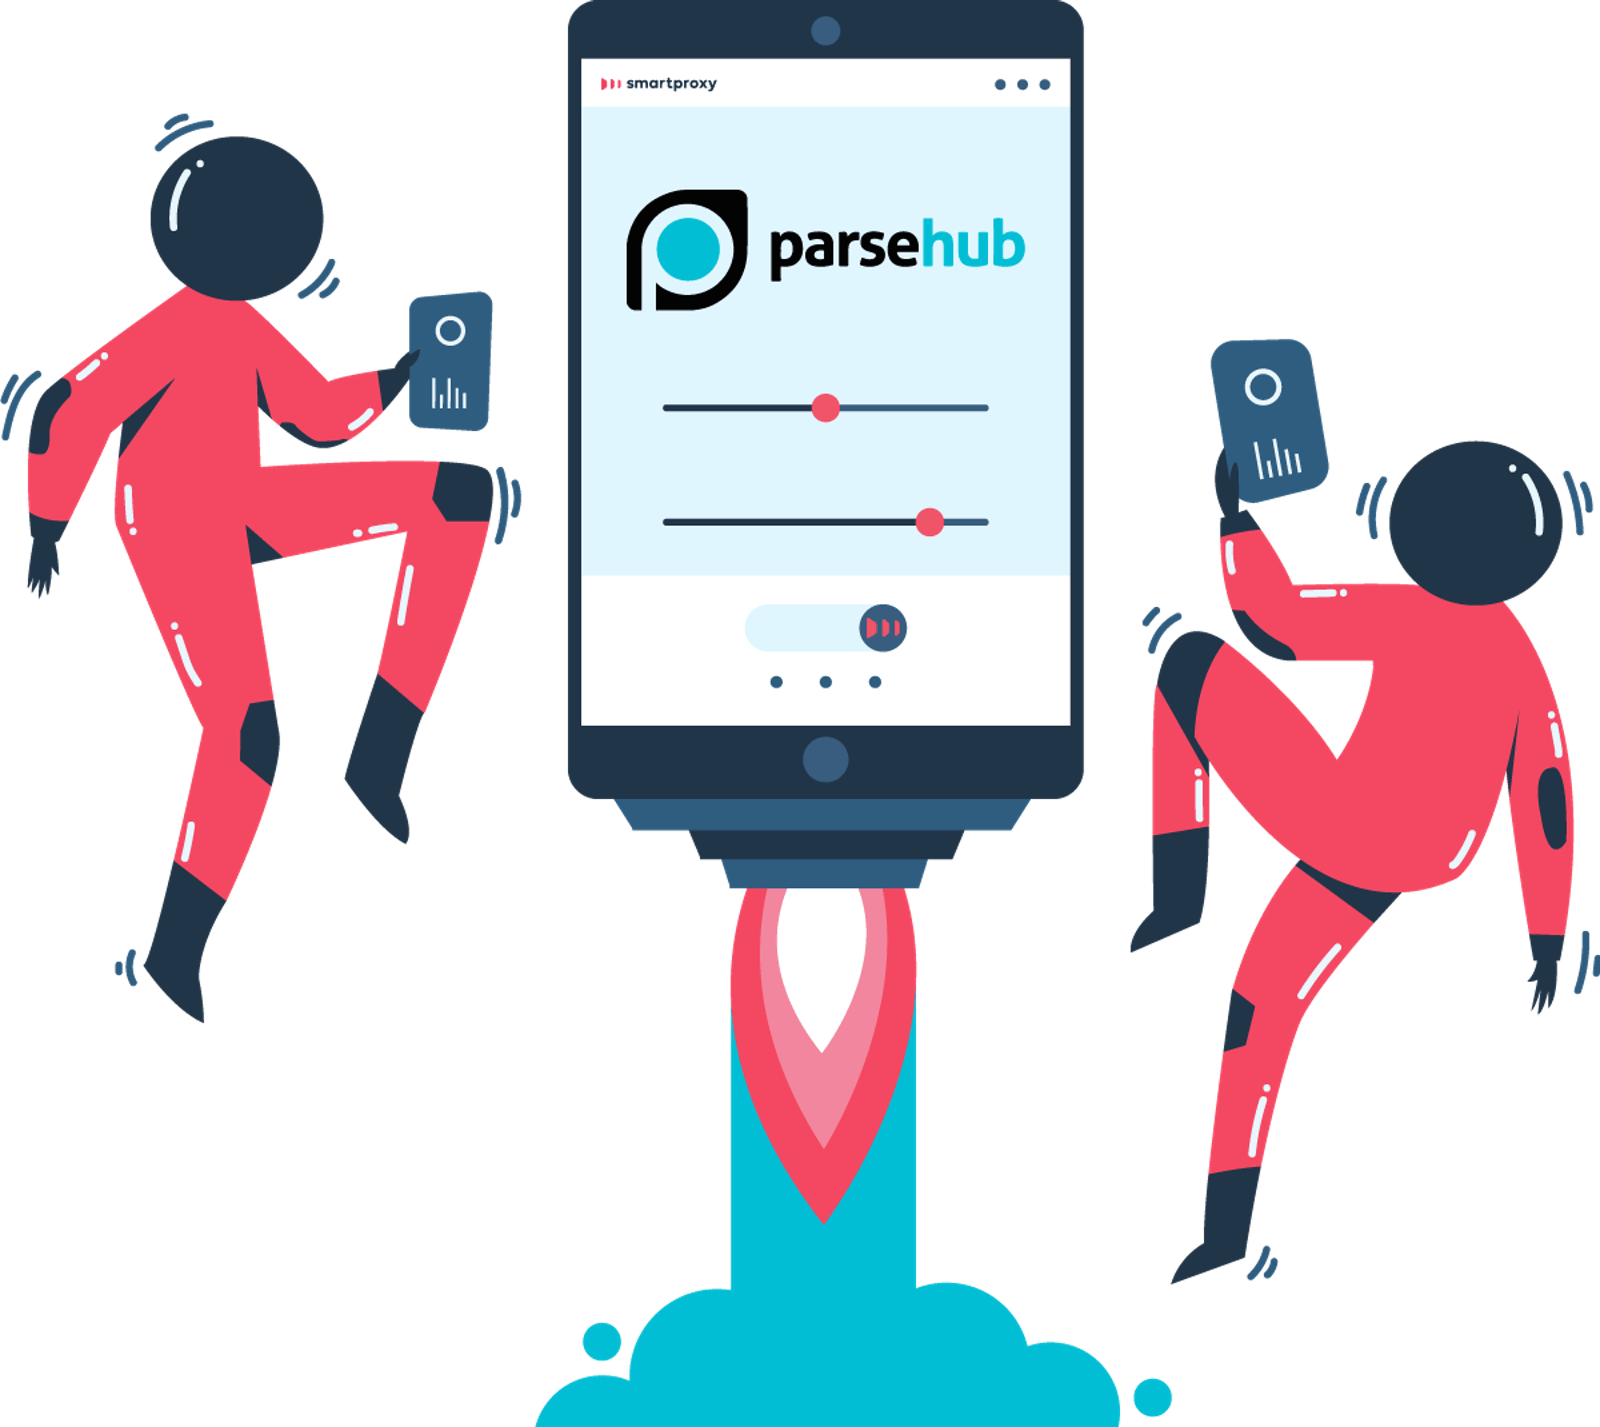 How to Set up Residential Proxies for Parsehub